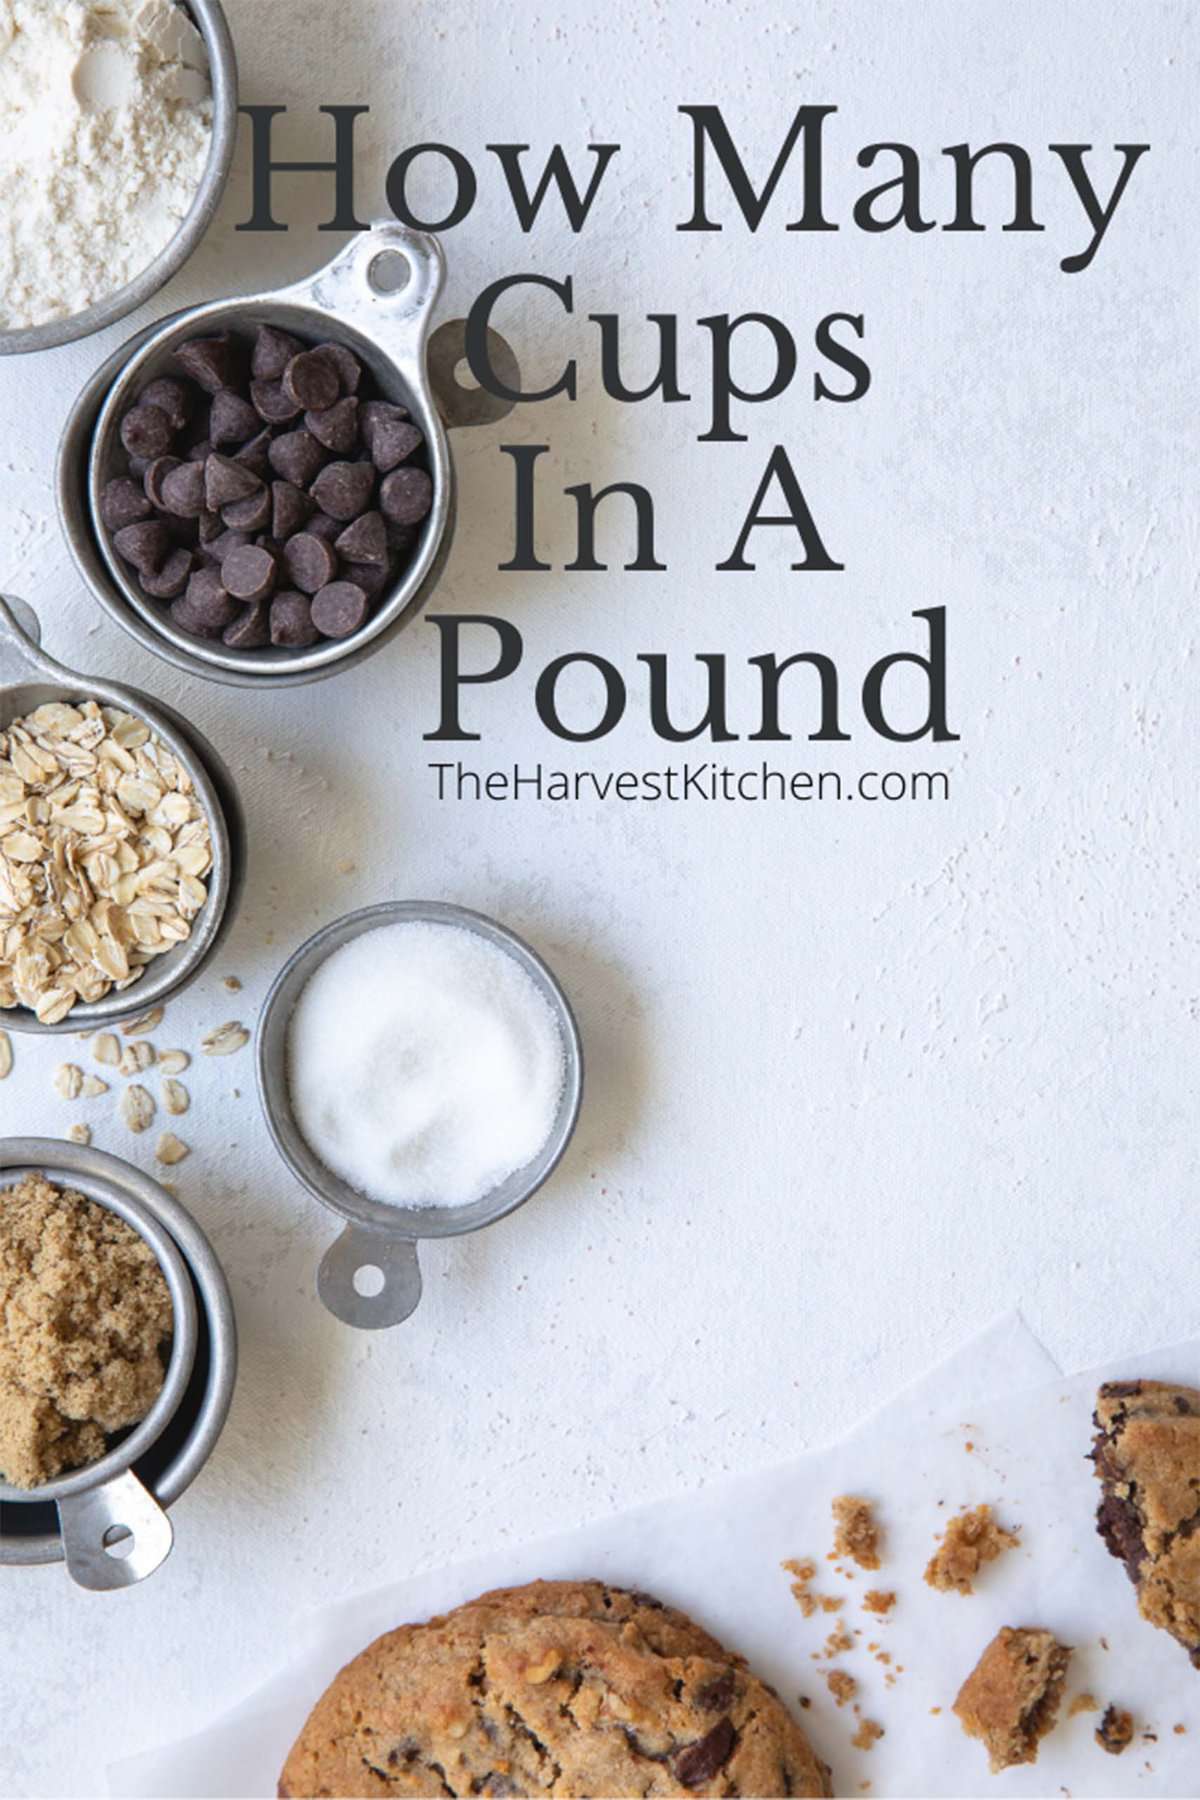 1 cup to 1 pound